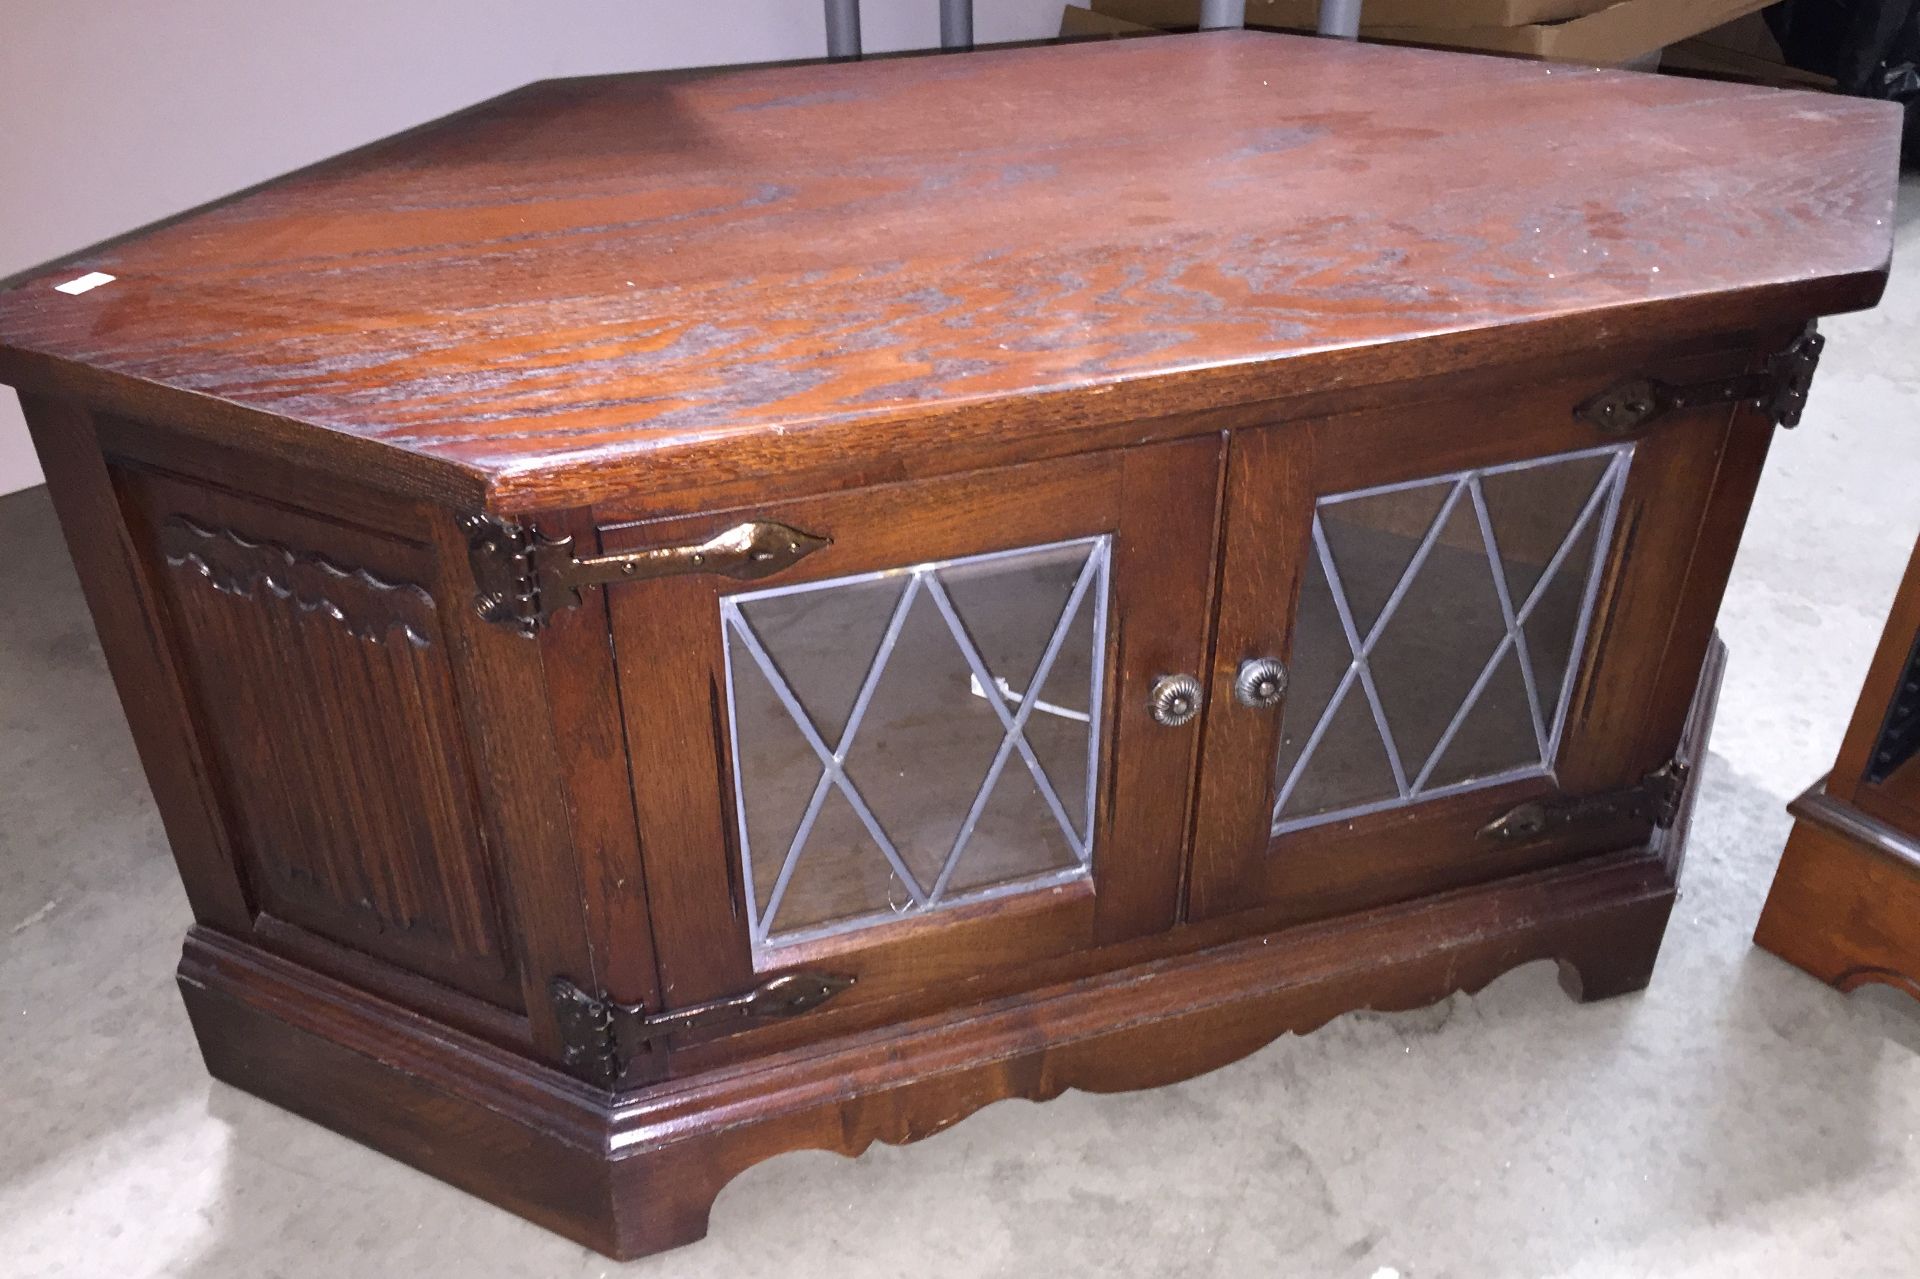 2 Items - Wood Bros Old Charm Hexagonal Mahogany Corner TV Stand with leaded glass doors and - Image 3 of 3